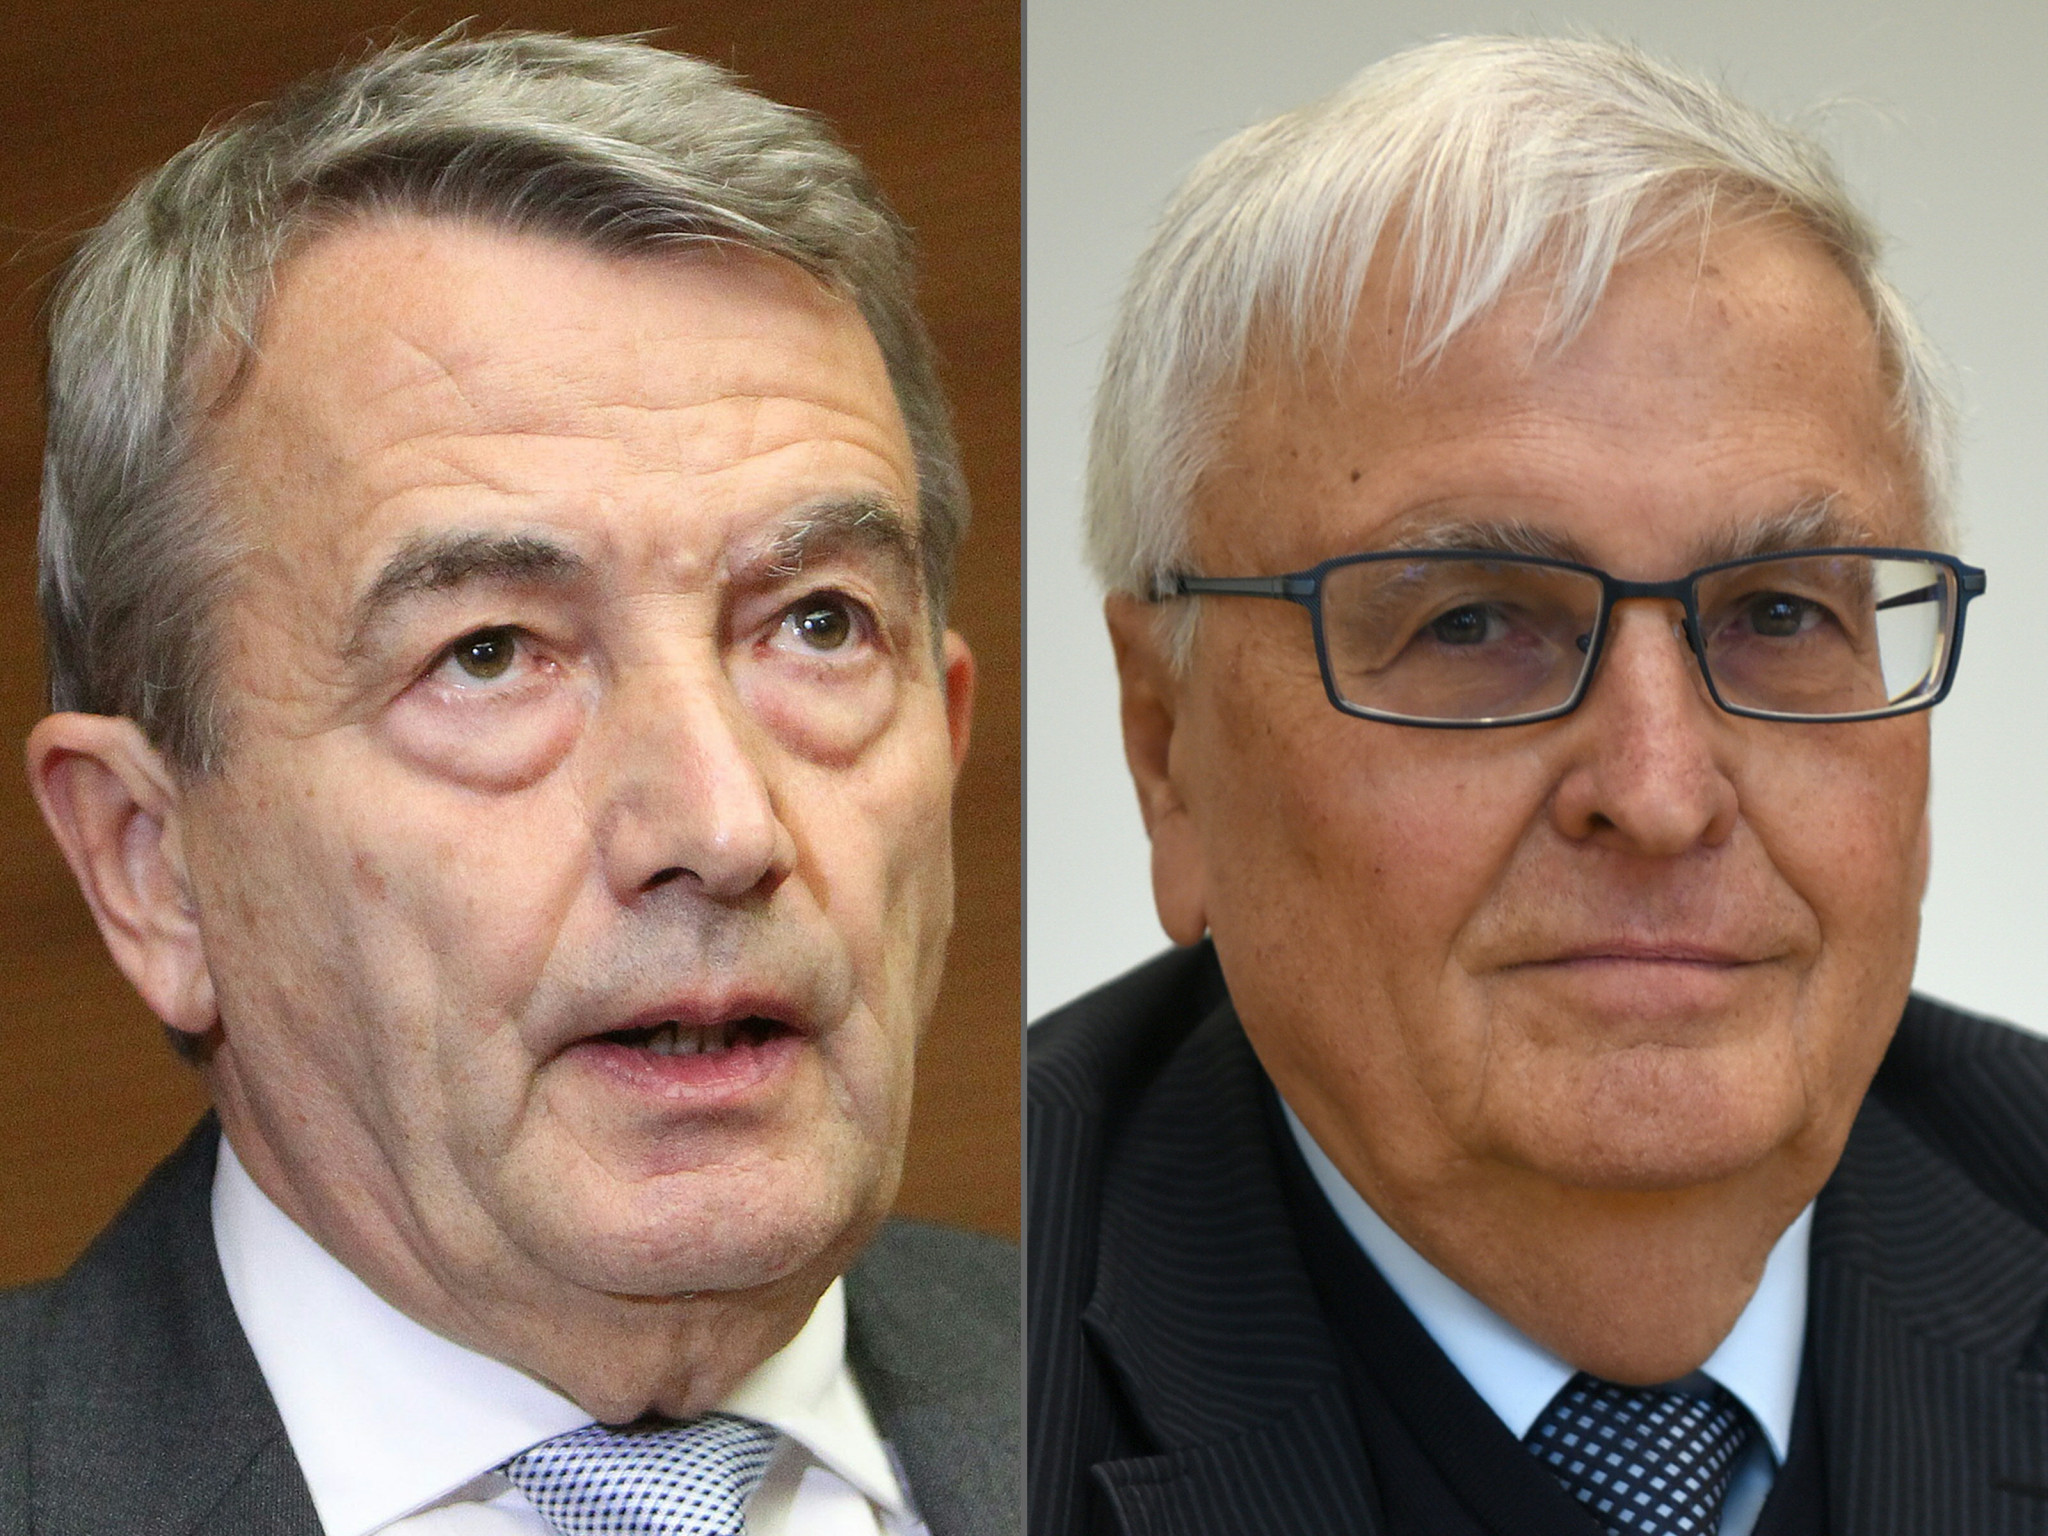 Former DFB officials Wolfgang Niersbach and Theo Zwanziger are among those to have been indicted by the OAG ©Getty Images